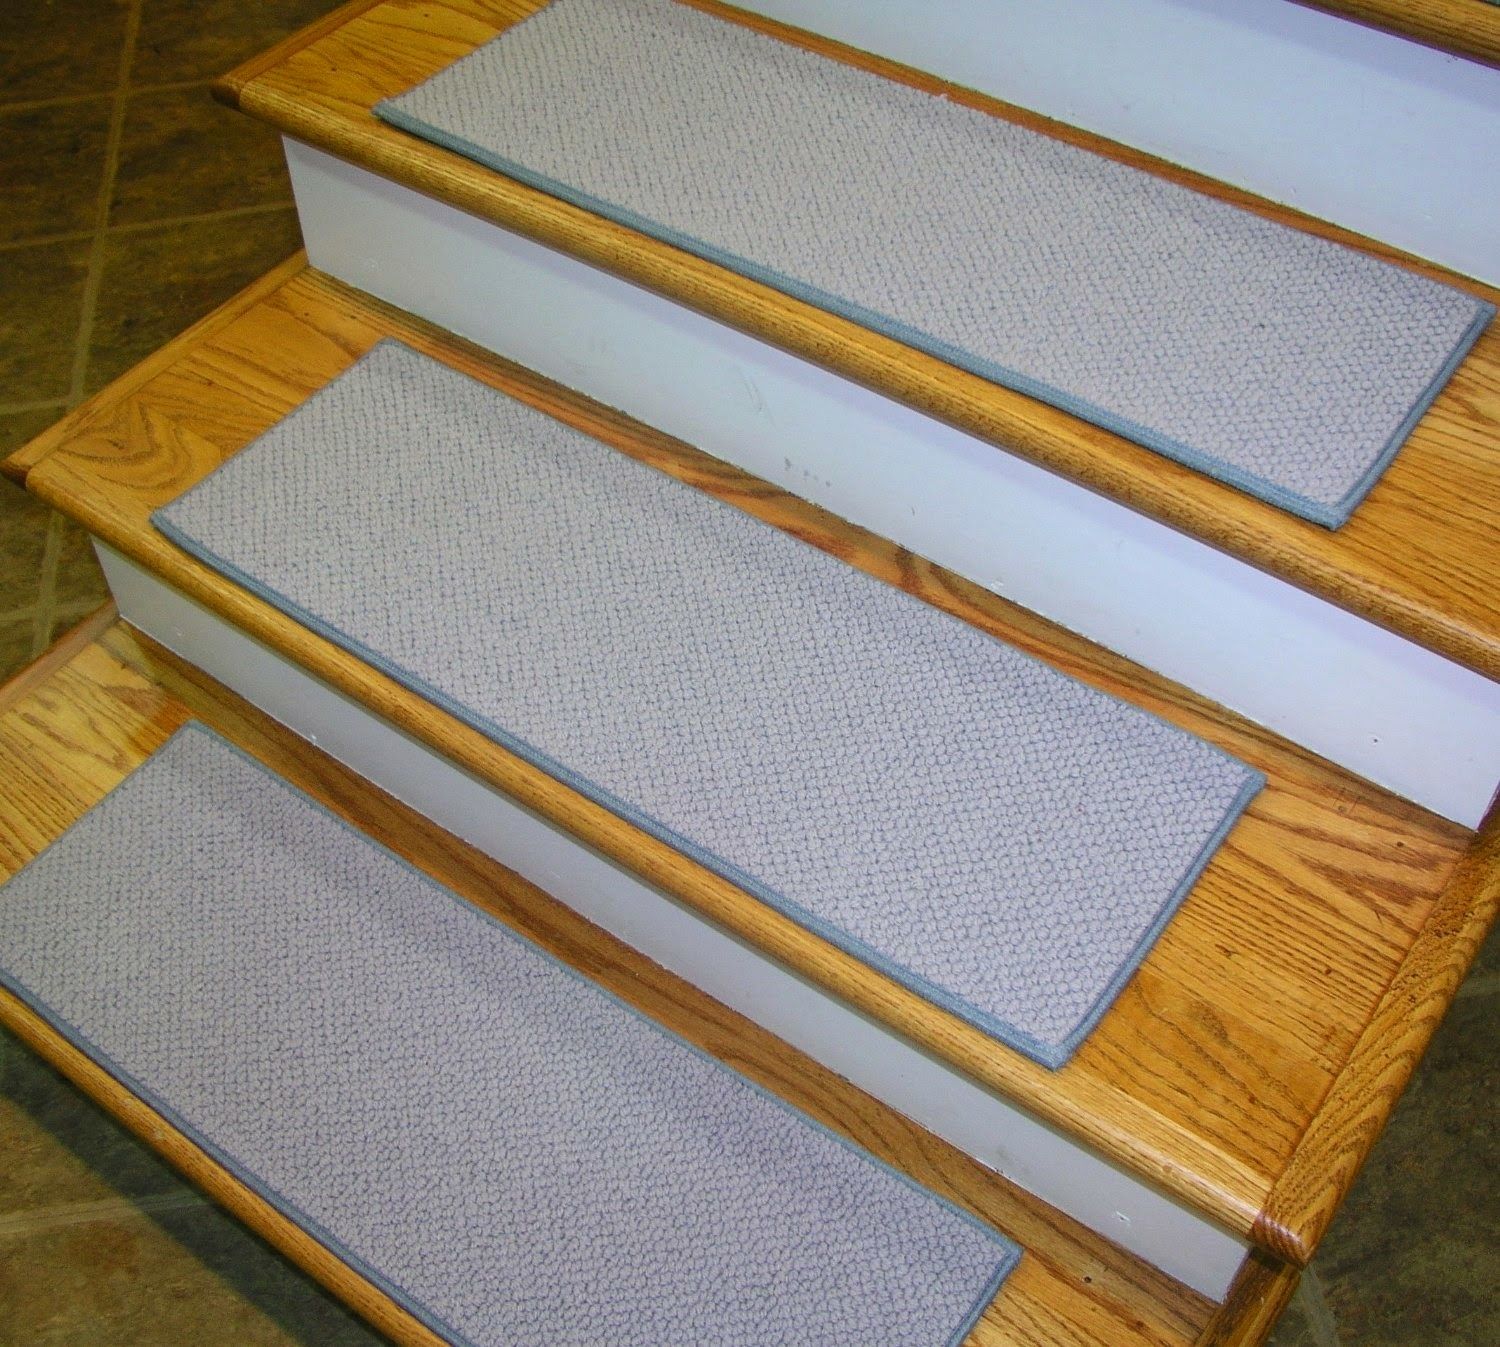 Flooring Pretty Stair Treads Carpet For Stair Decoration Idea Regarding Stair Tread Rugs For Dogs (View 17 of 20)